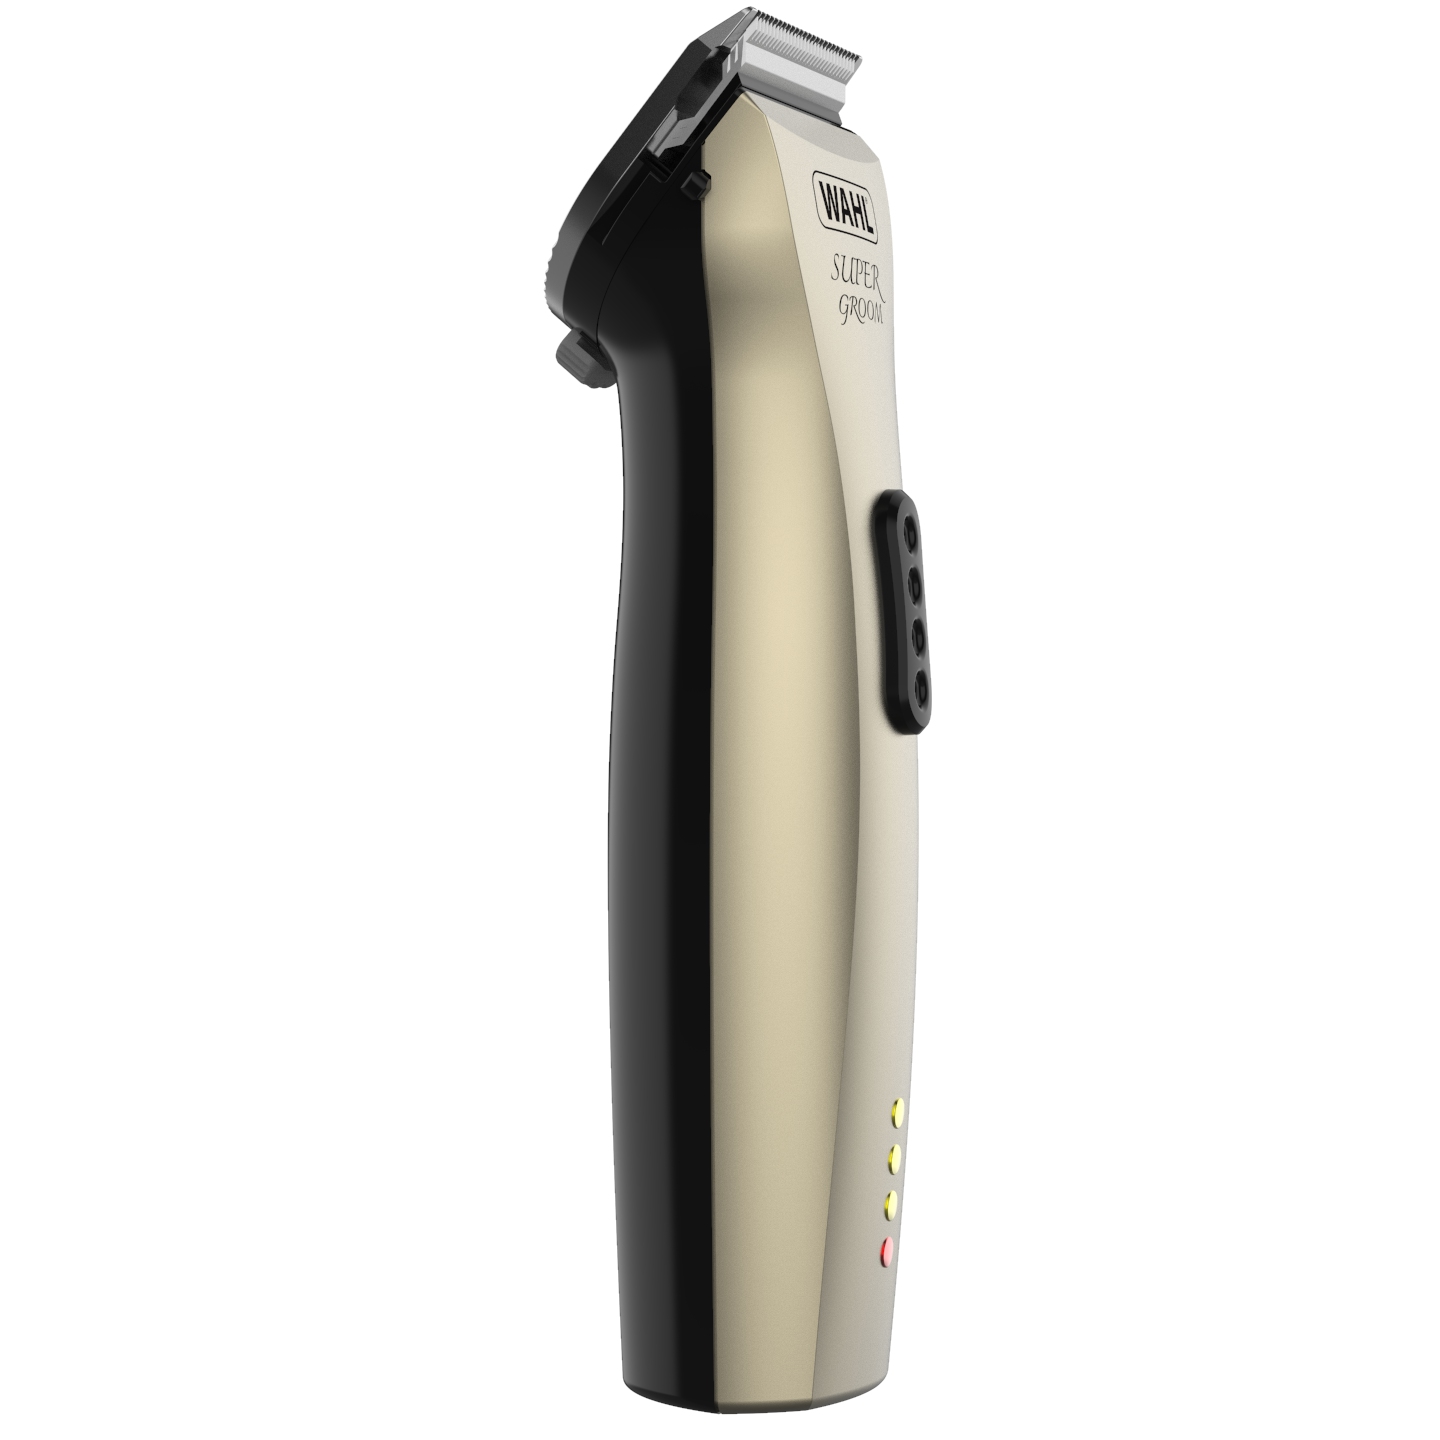 wahl super groom dog clippers